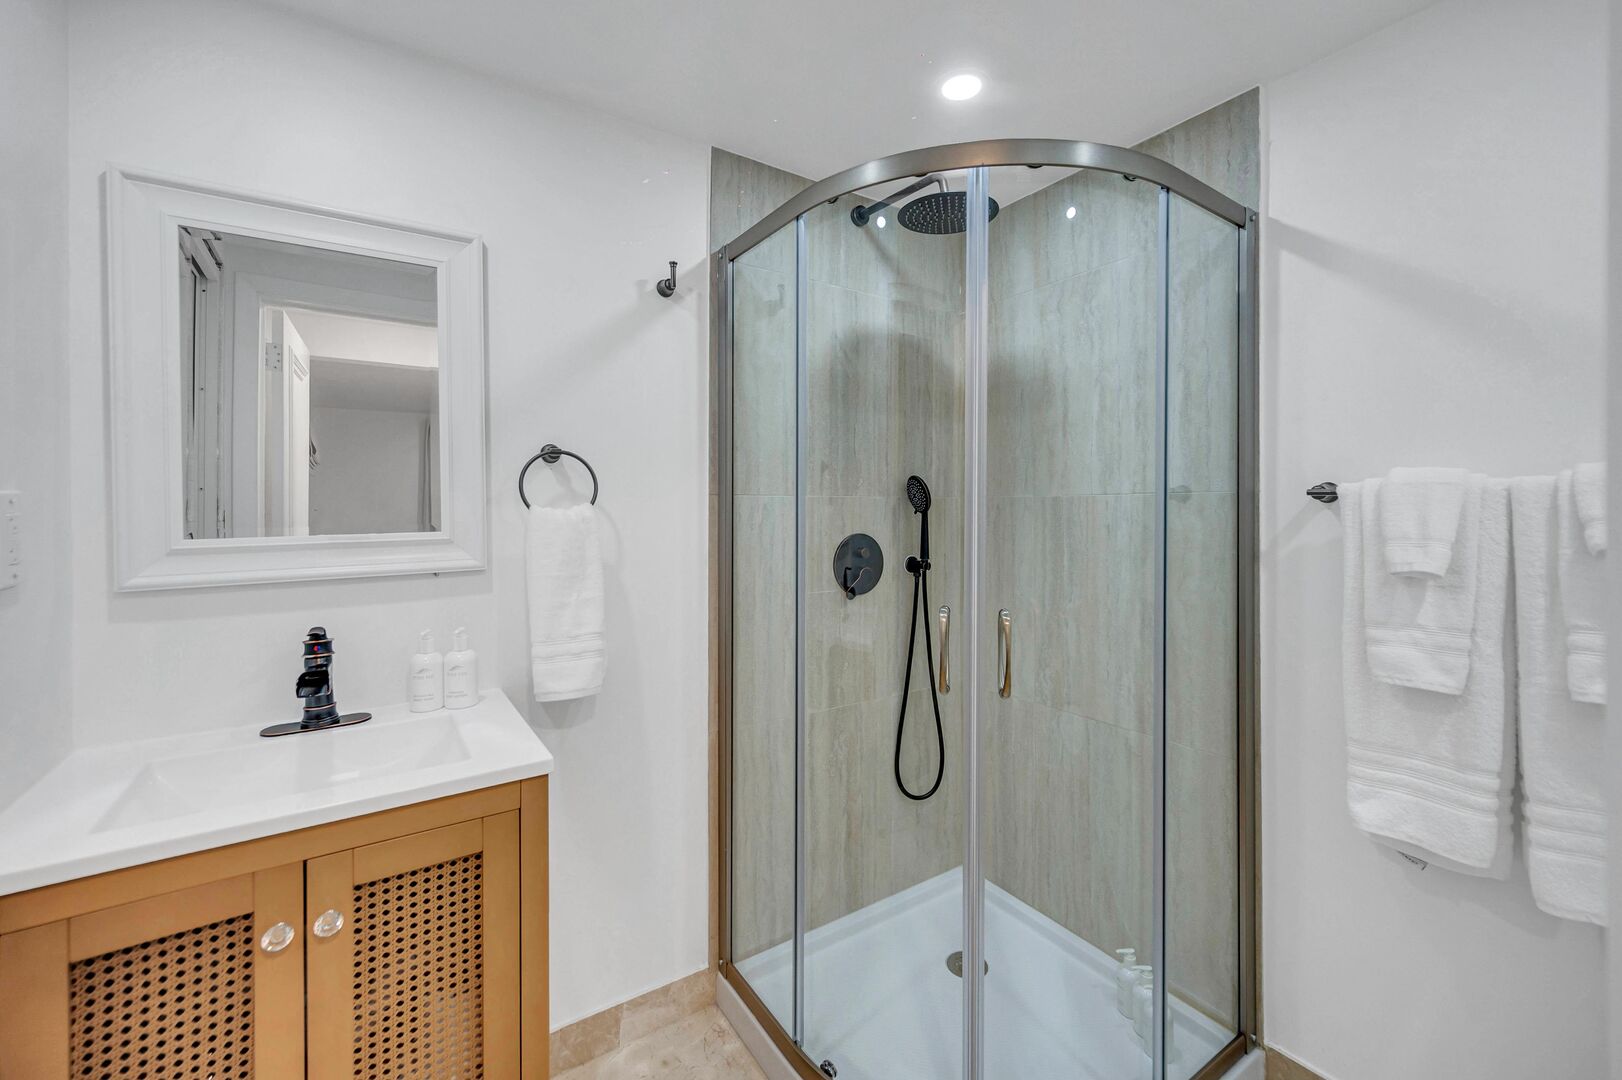 The ensuite bathroom of bedroom two features a shower.